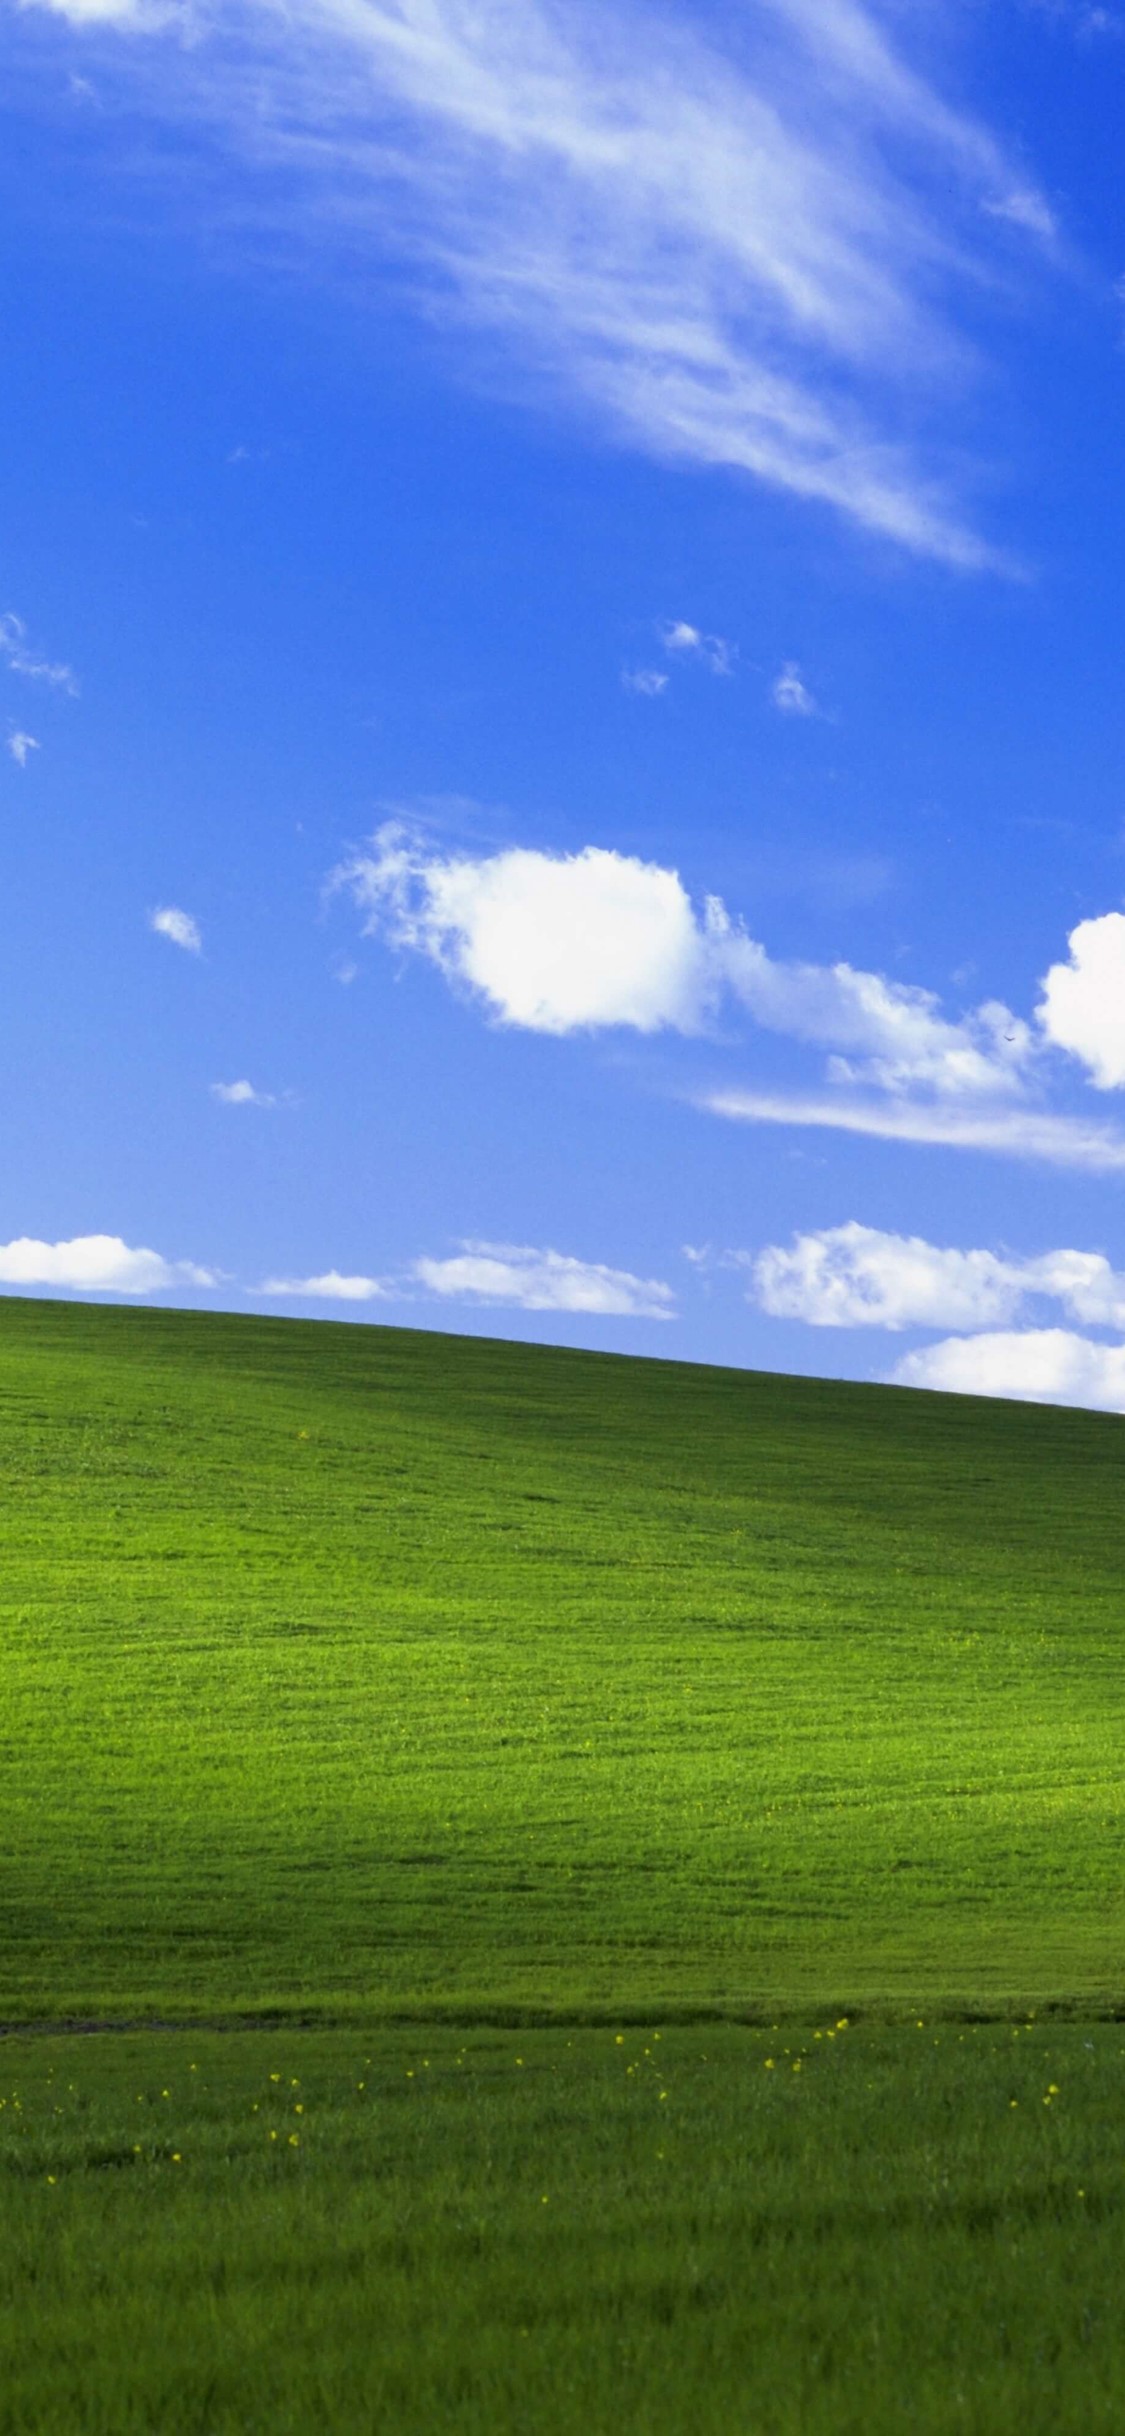 Search for software Bliss Iconic desktop image from Microsofts Windows  XP still lures hill seekers  GeekWire